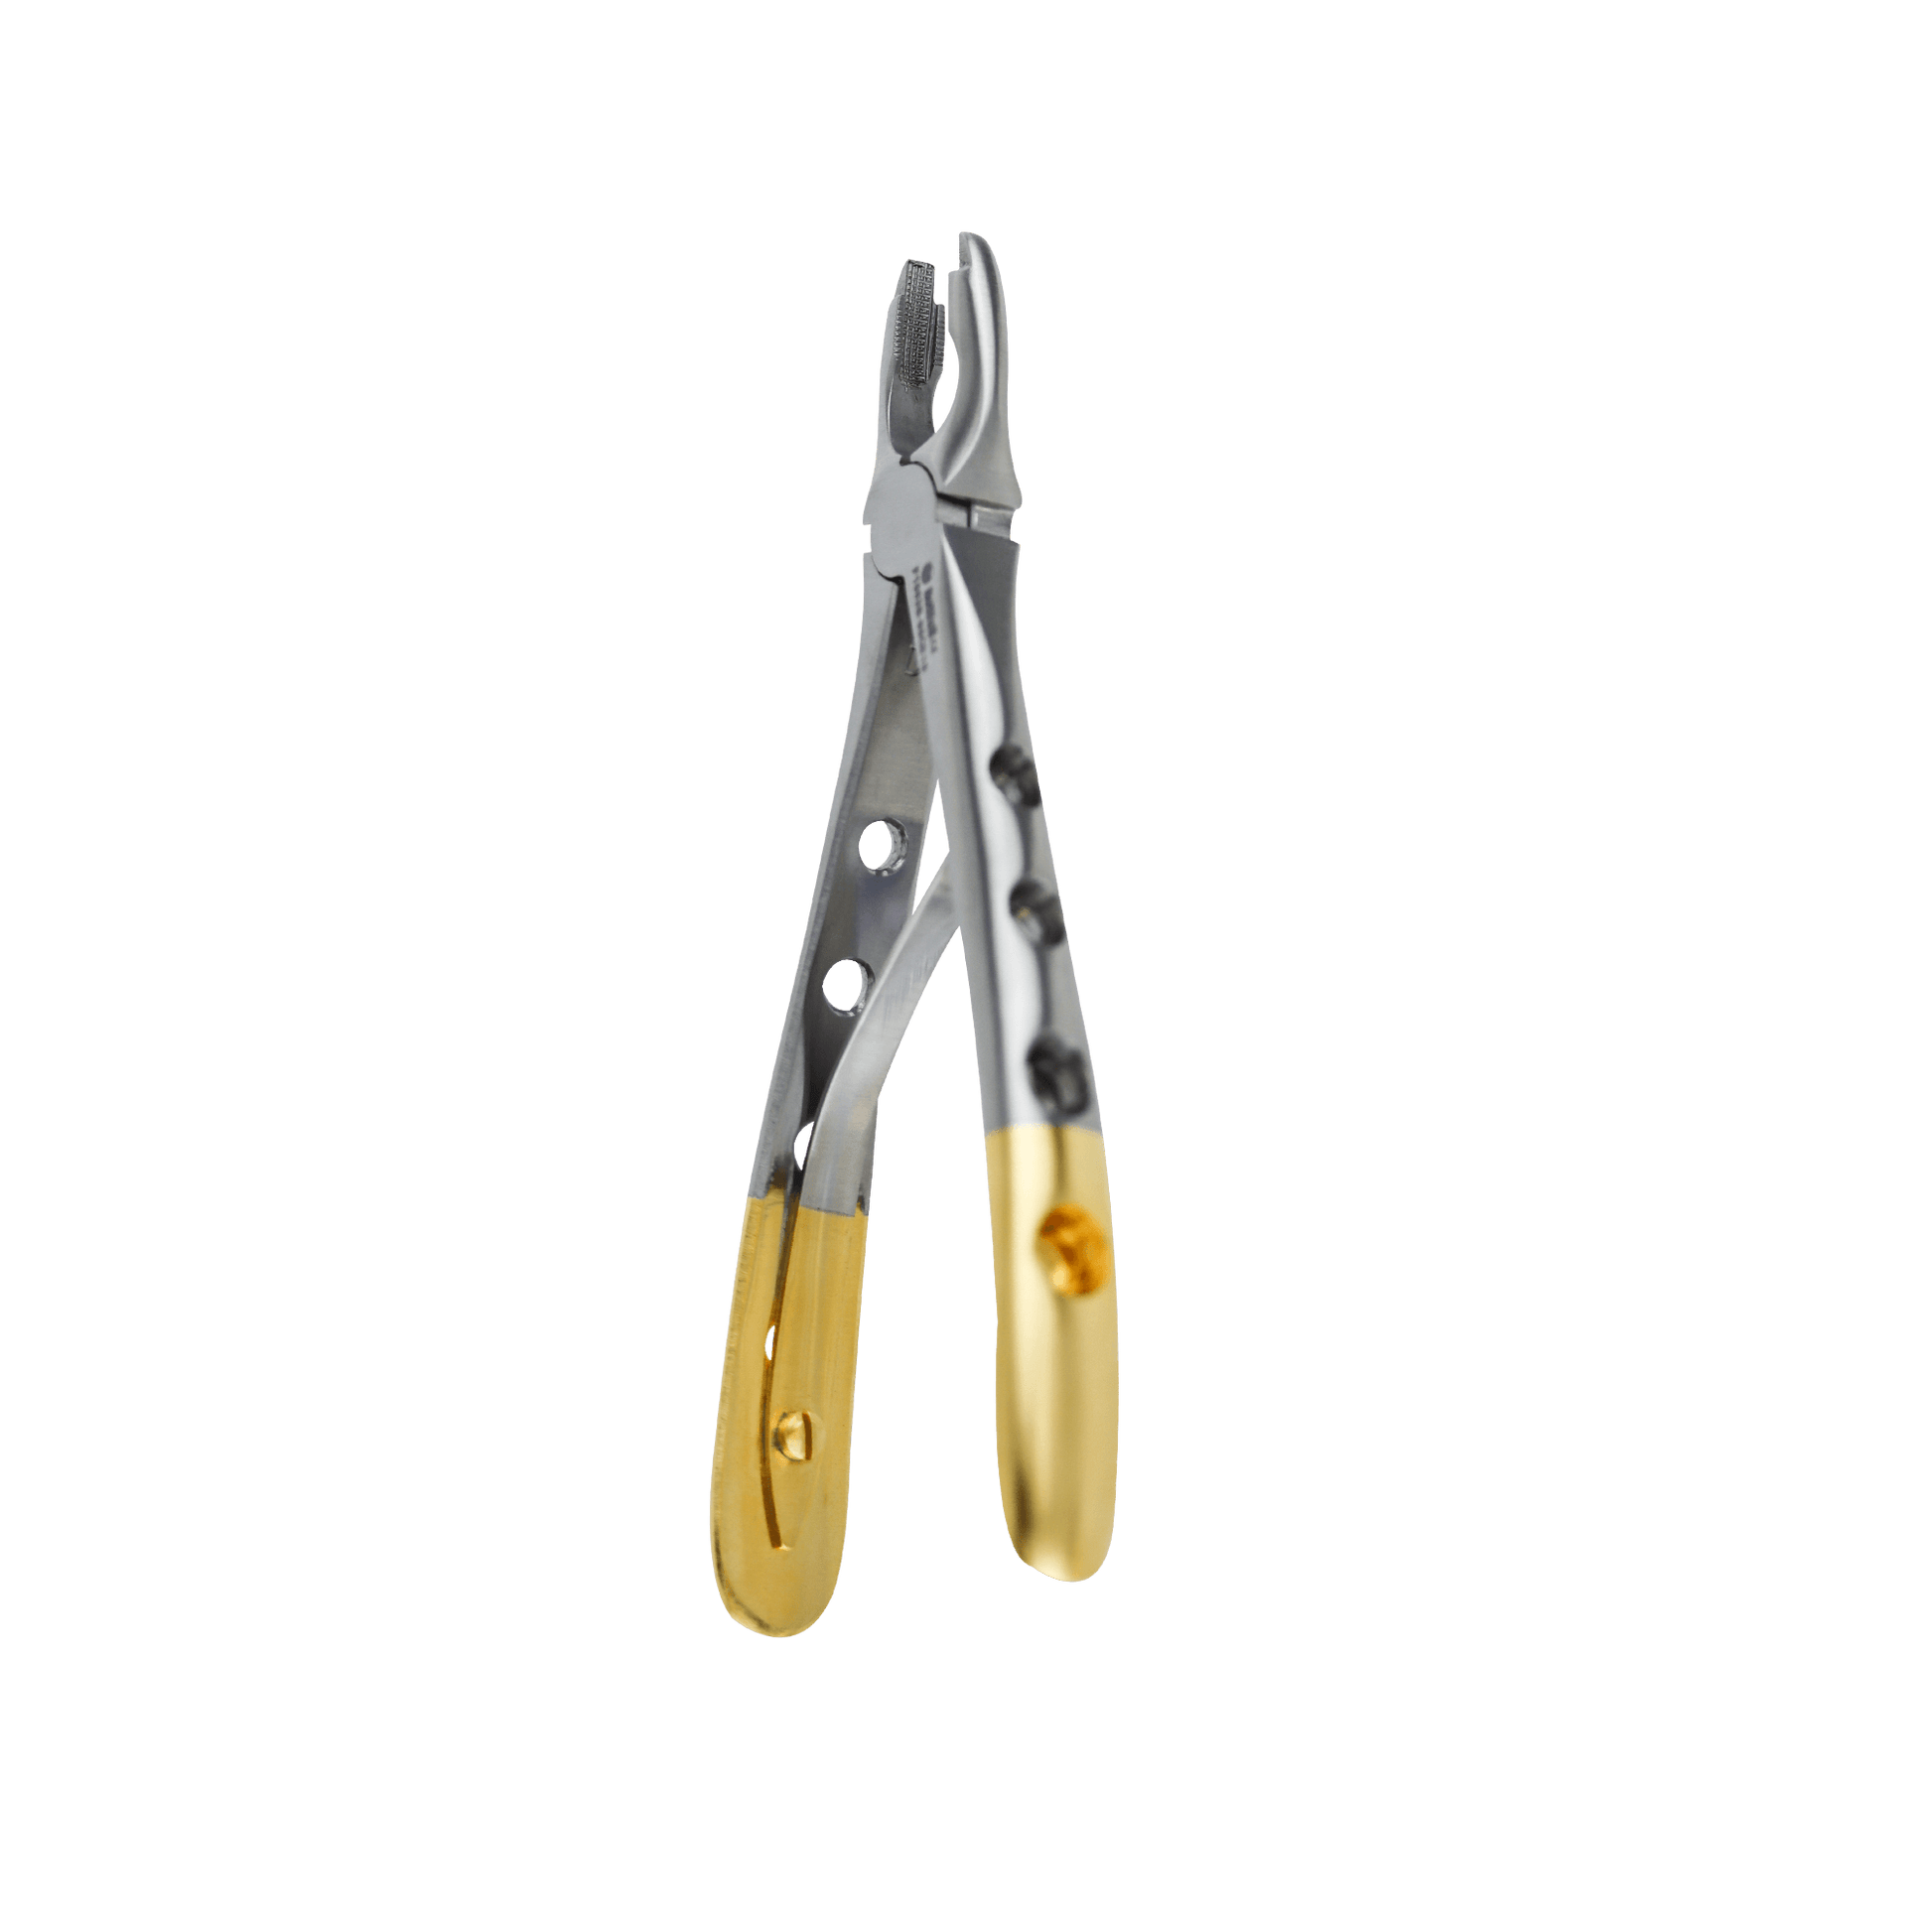 Atraumatic Extraction Apical Retention Forcep-Upper Anterior Pediatric Extraction Forceps